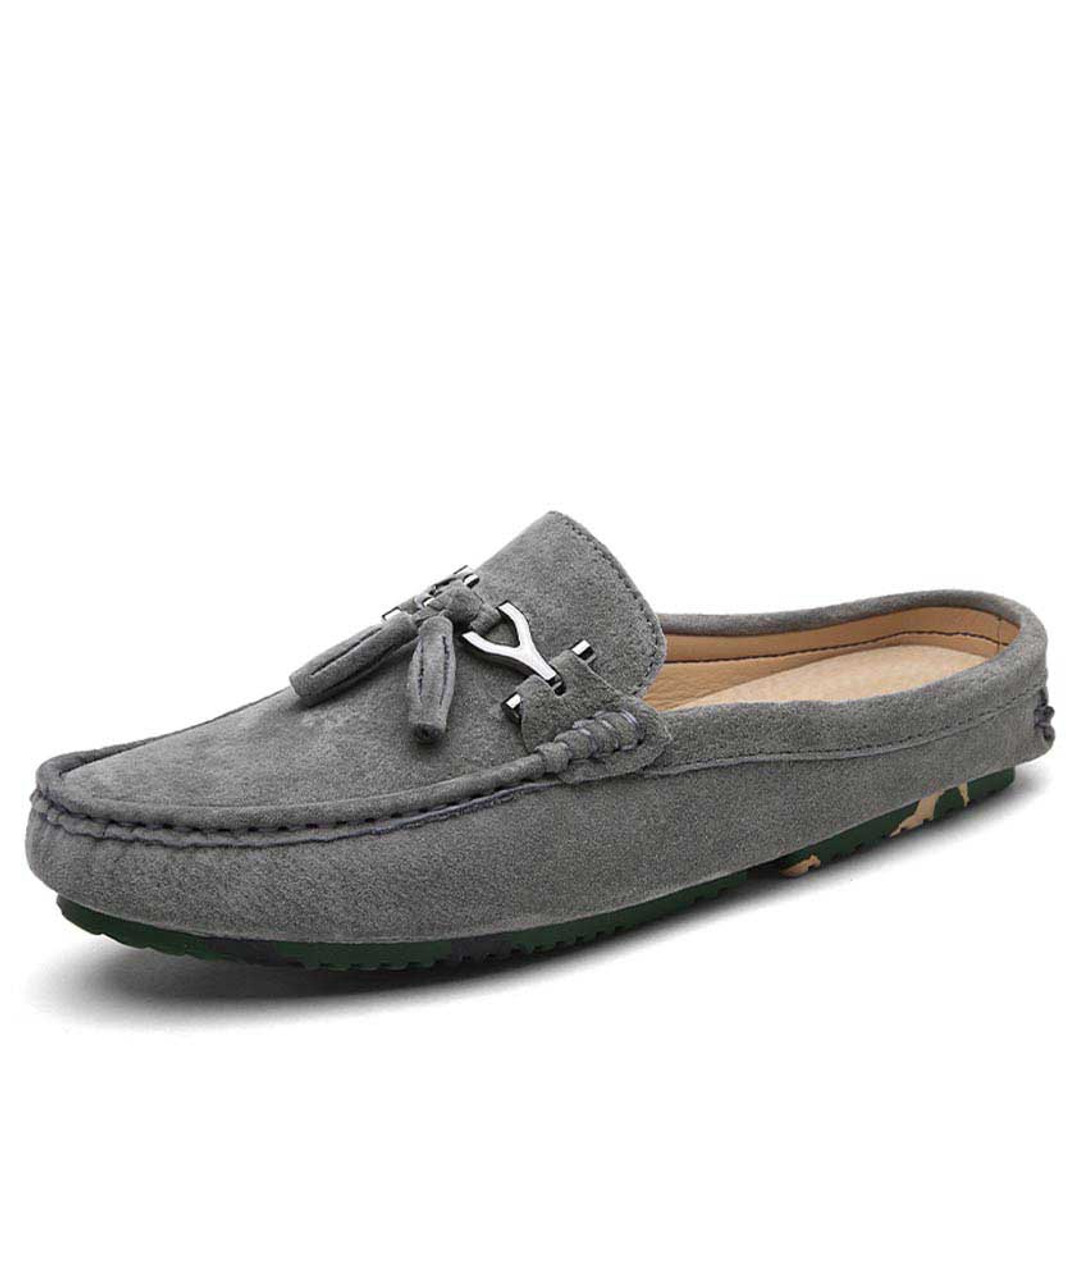 slip on shoes with tassels